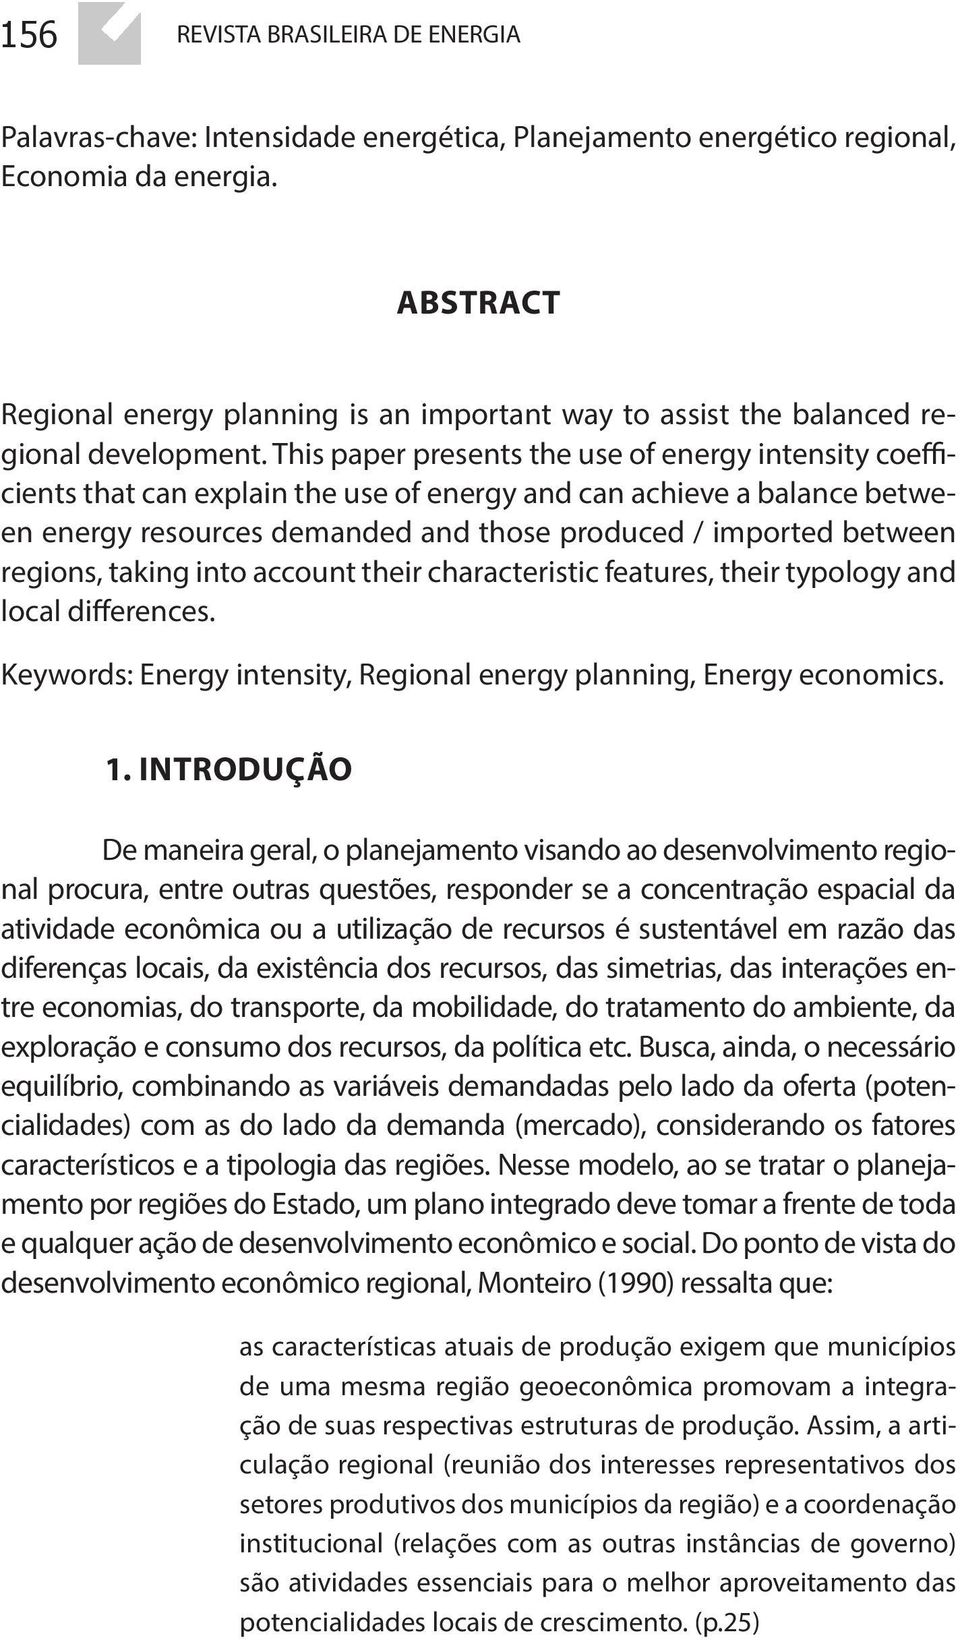 This paper presents the use of energy intensity coefficients that can explain the use of energy and can achieve a balance between energy resources demanded and those produced / imported between